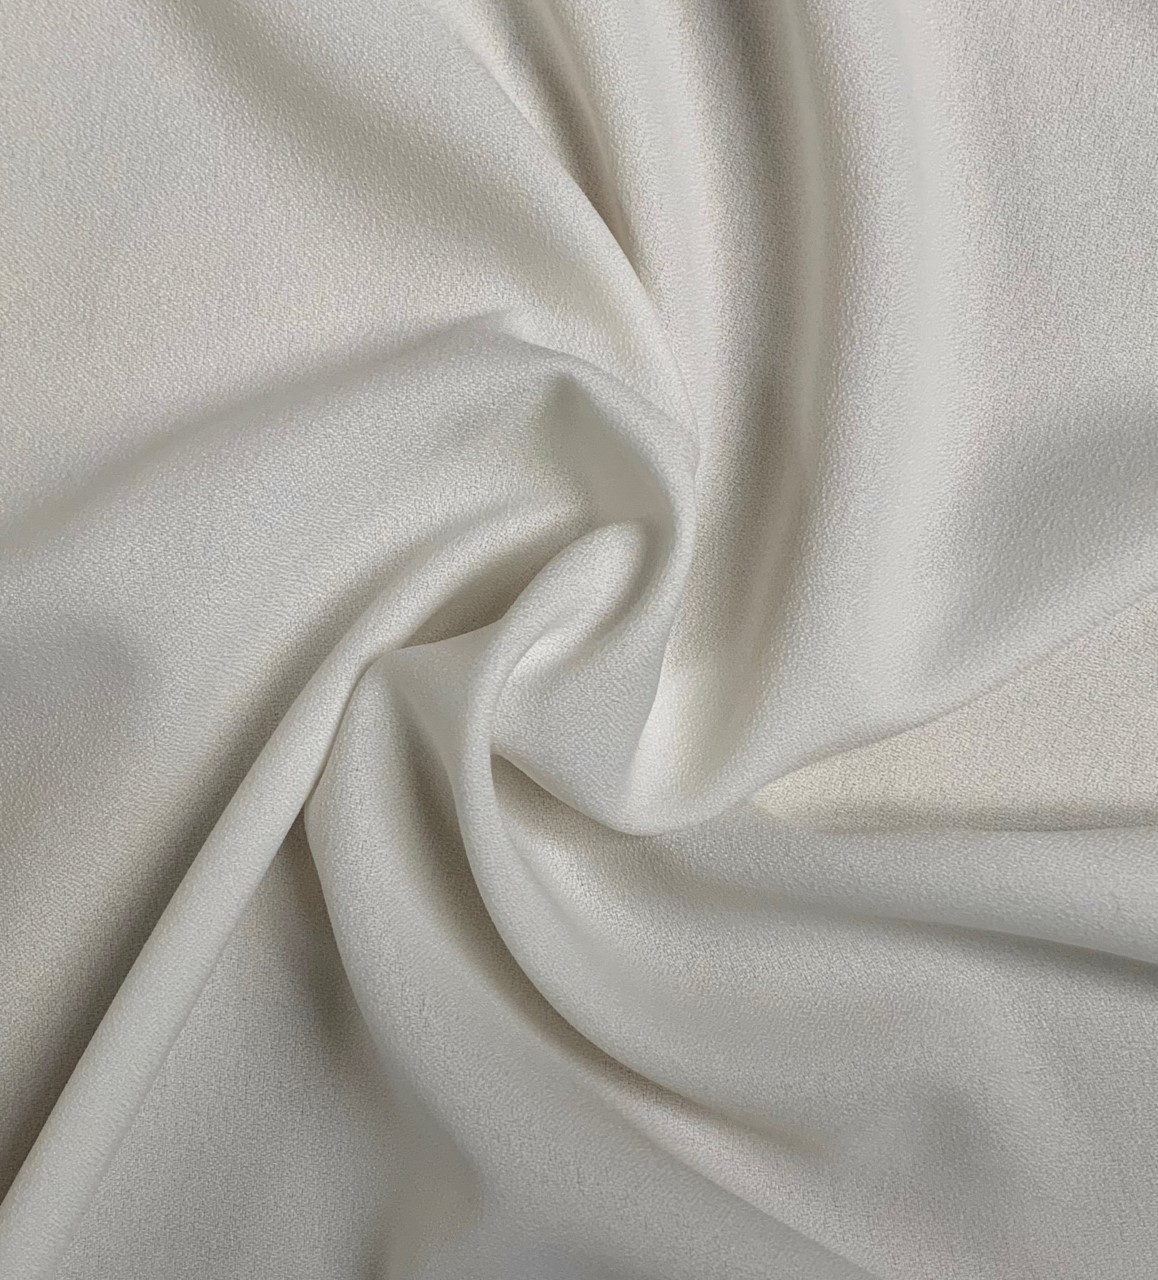 60" Wide Off-White Crepe- By the yard (100% Polyester)